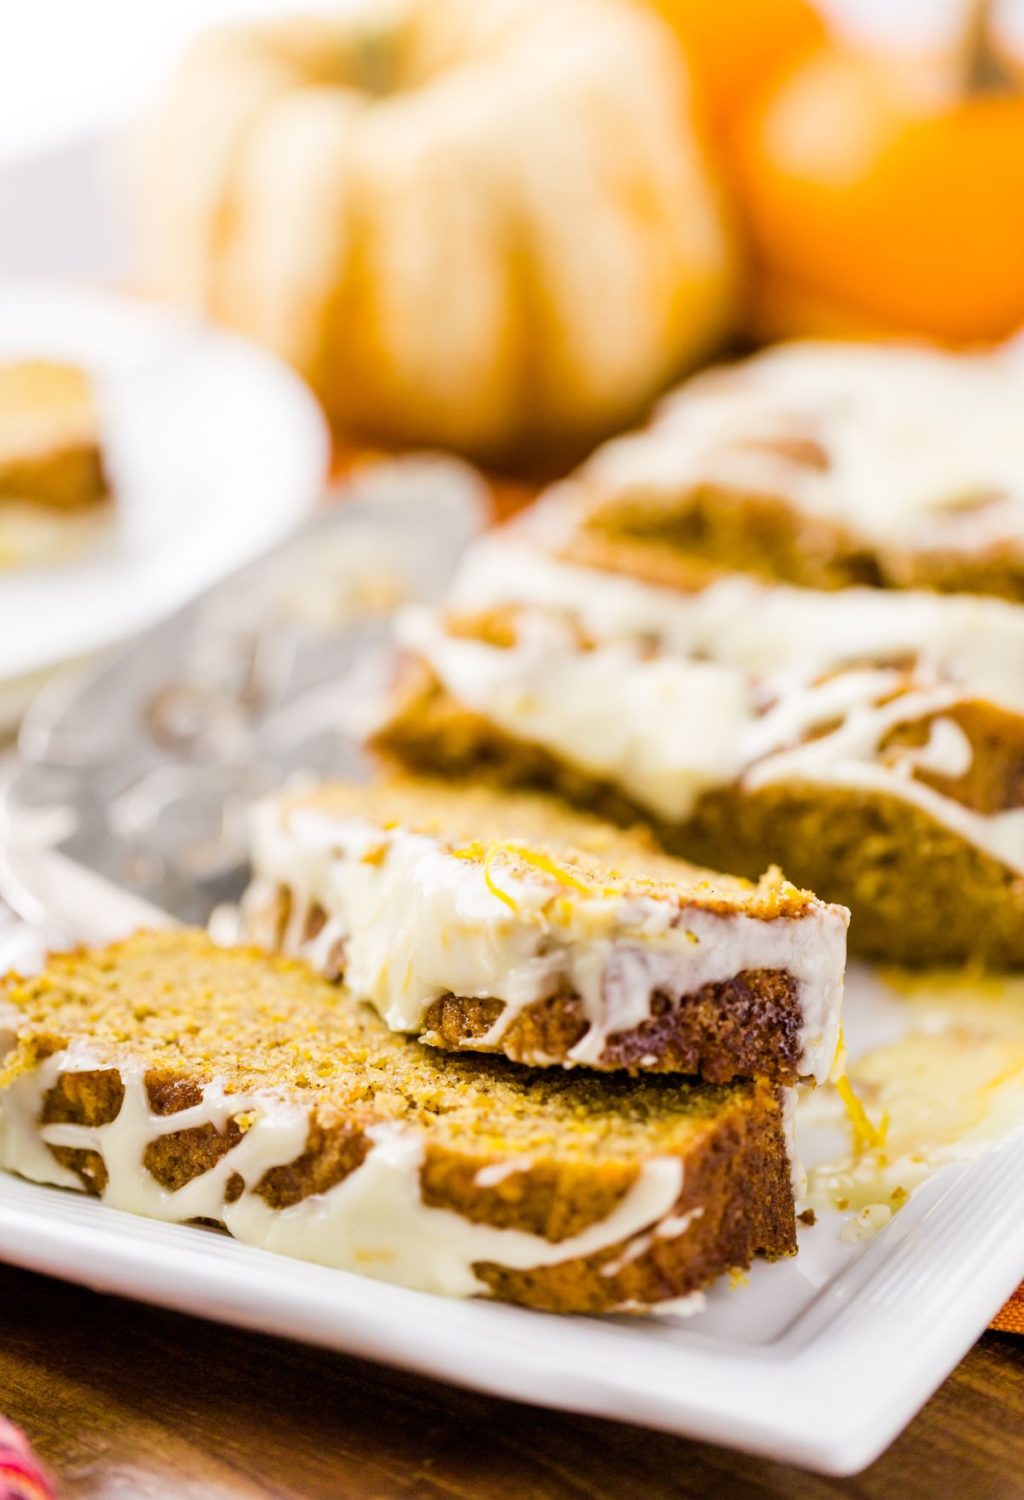 A slice of pumpkin bread on a white plate.